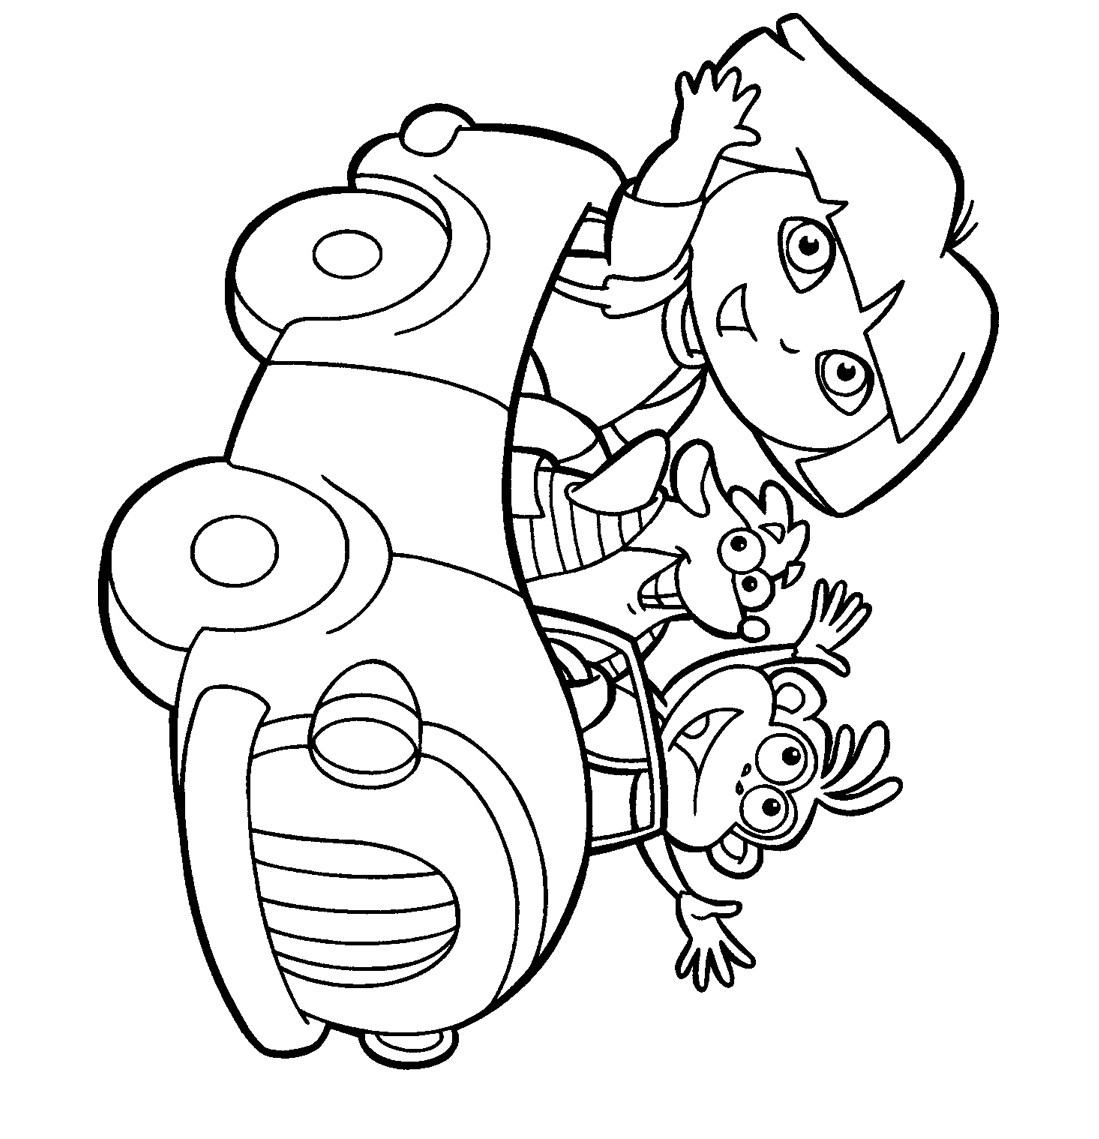 Kids Coloring Sheet
 Printable coloring pages for kids